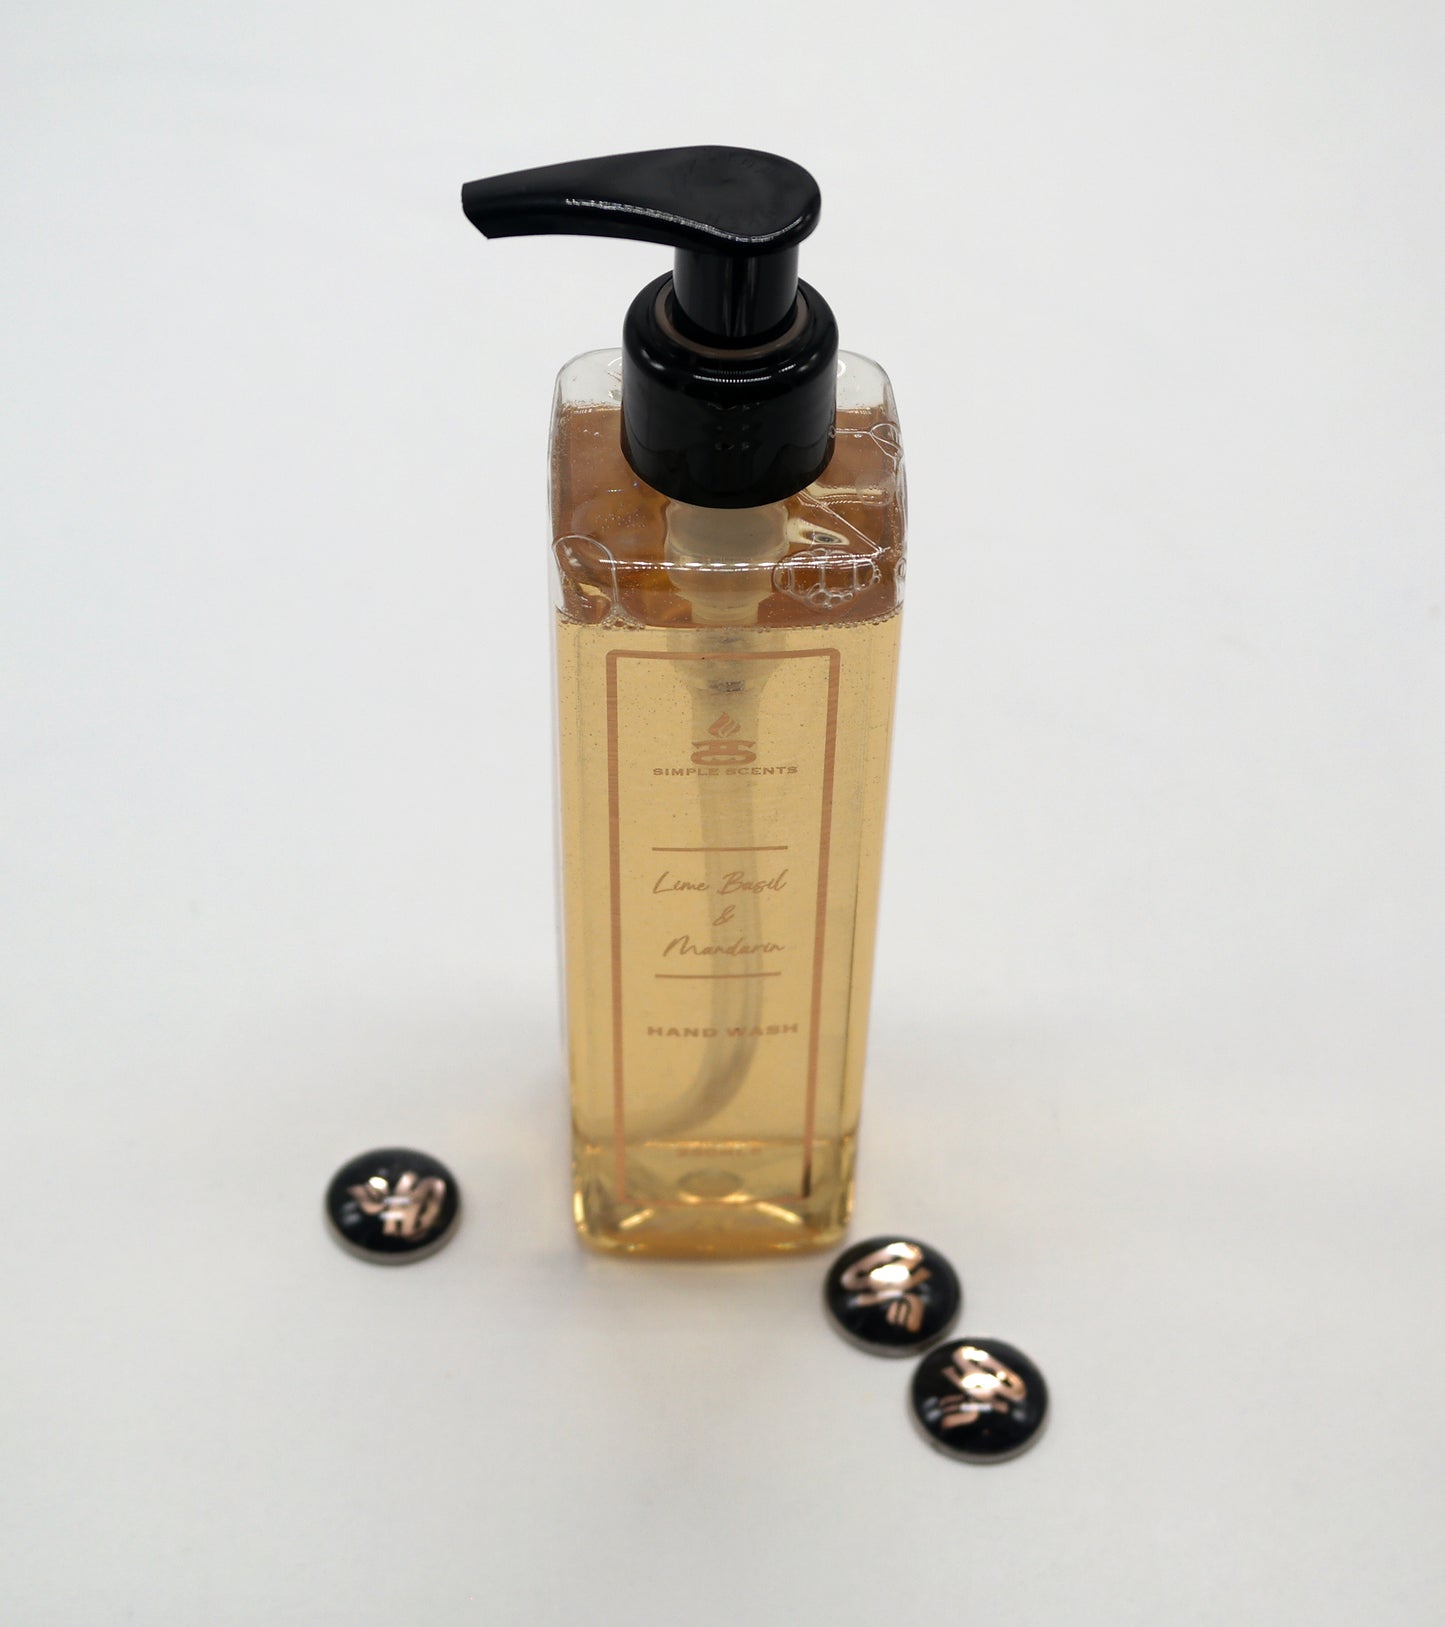 Lime Basil & Mandarin Hand Wash in bottle with Simple Scents pendants